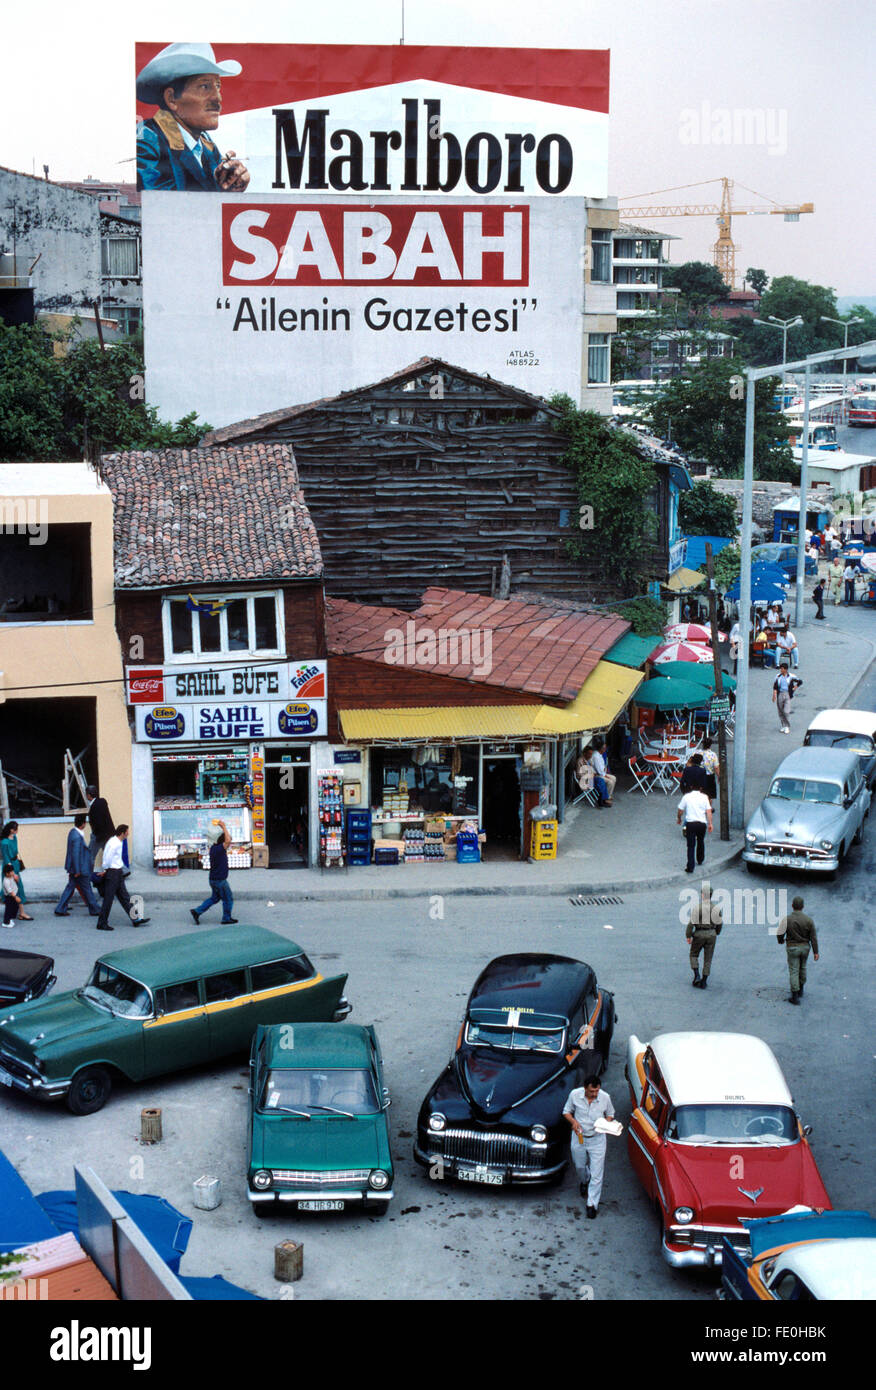 Istanbul Street Scene or Street View with Advertisement Hoardings Advertising Marlboro Cigarettes and the Turkish Daily Newspaper Sabah, and Vintage Dolmus or Collective Taxis, in the Fatih District, Istanbul, Turkey Stock Photo